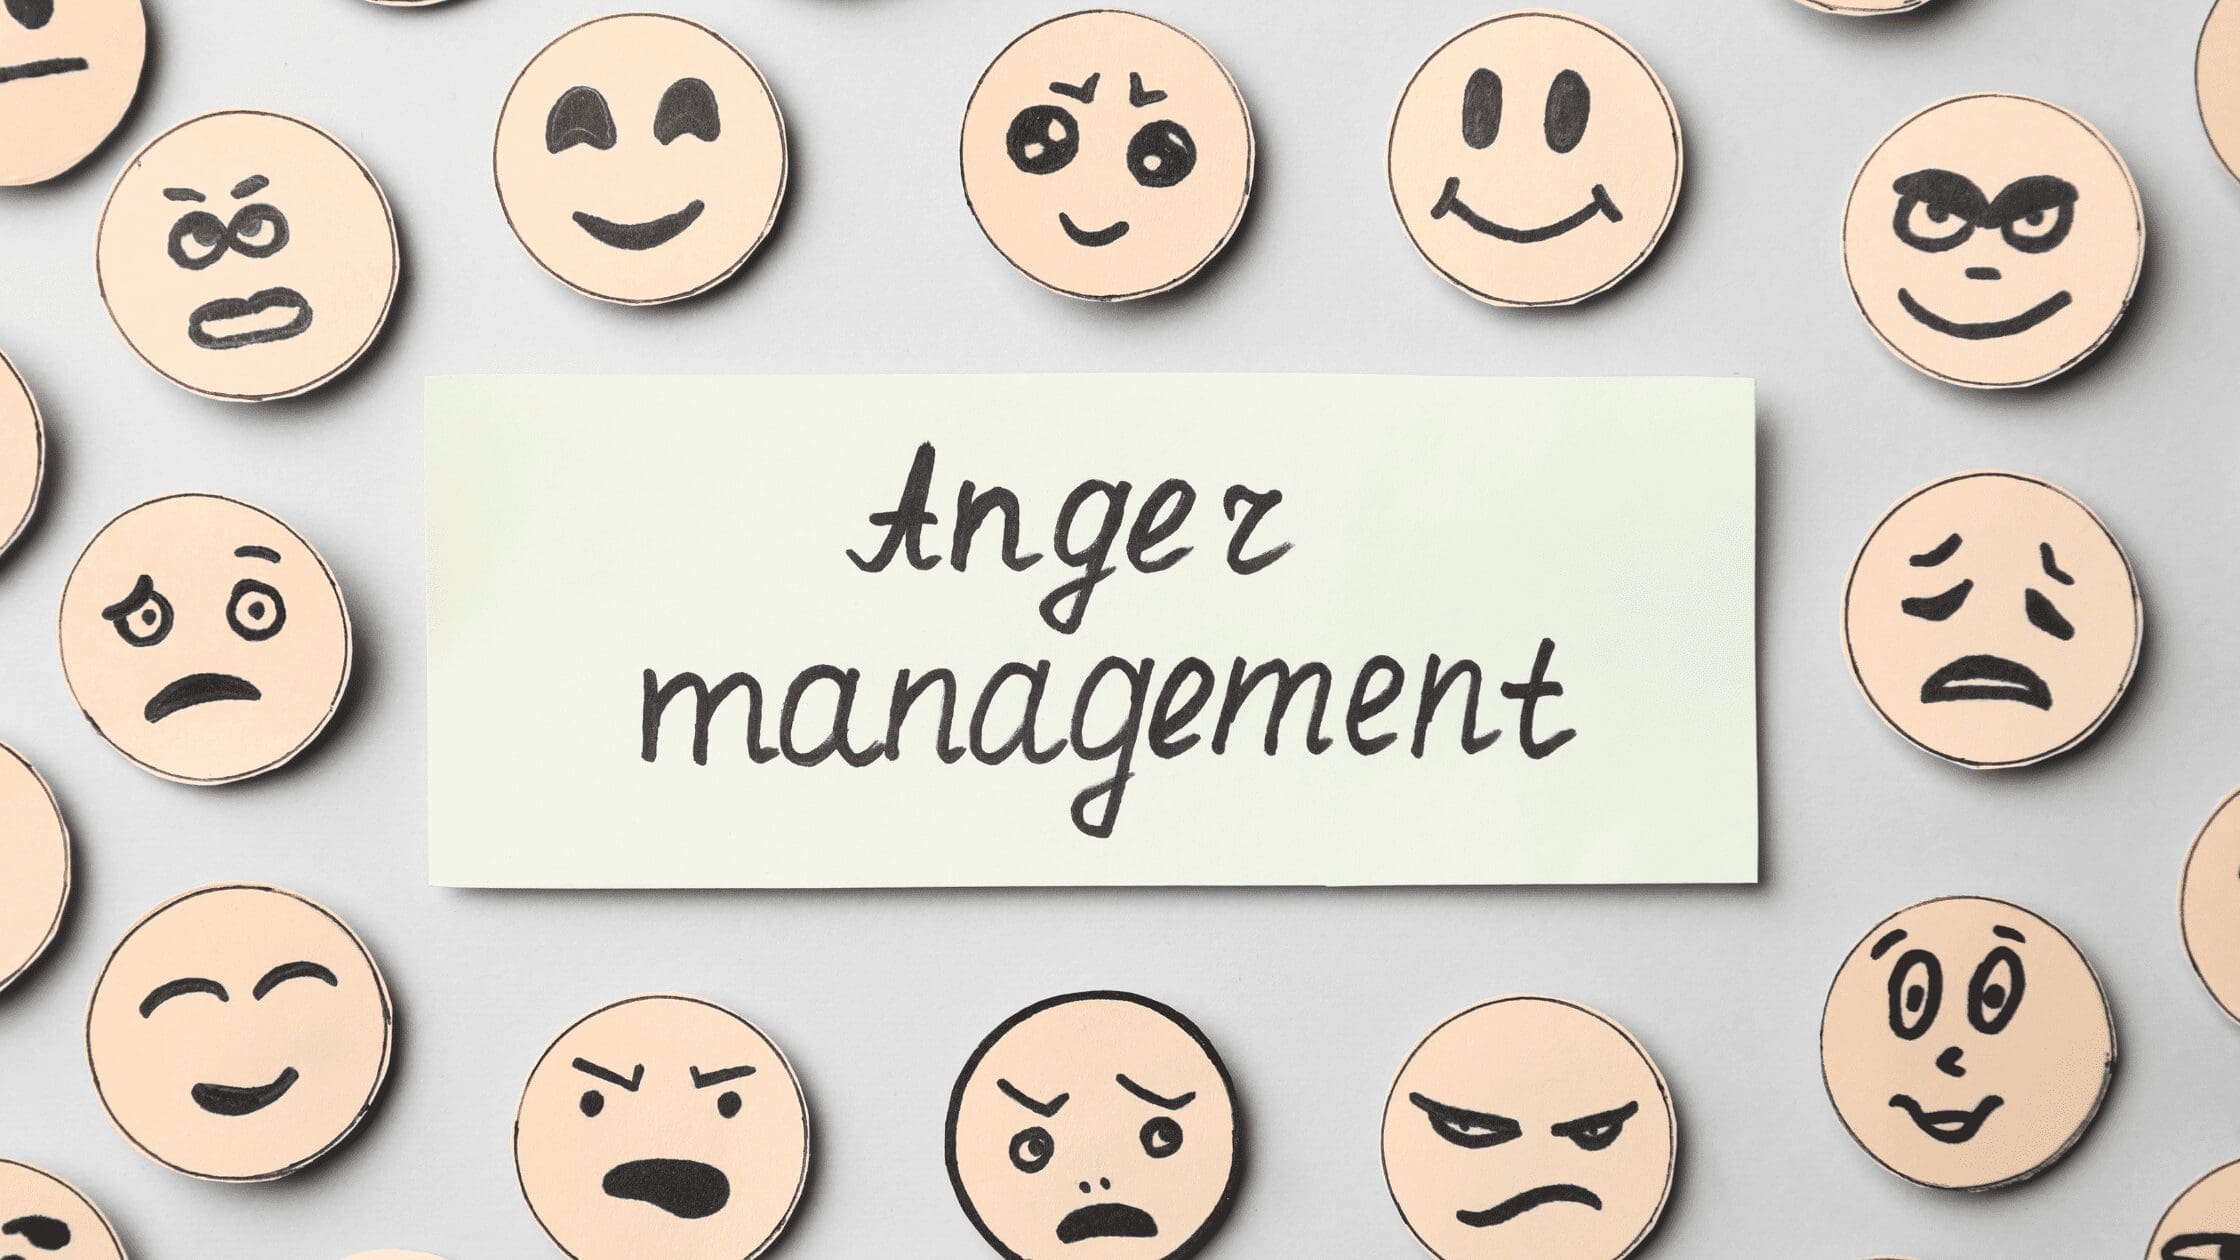 The words Anger Management are written in black cursive on an off-white rectangular area surrounded by different facial expressions on wooden circles on a gray background. Mental Health. Coping Skills. Diversion. Warning Signs. Triggers. Anger Log. Time outs